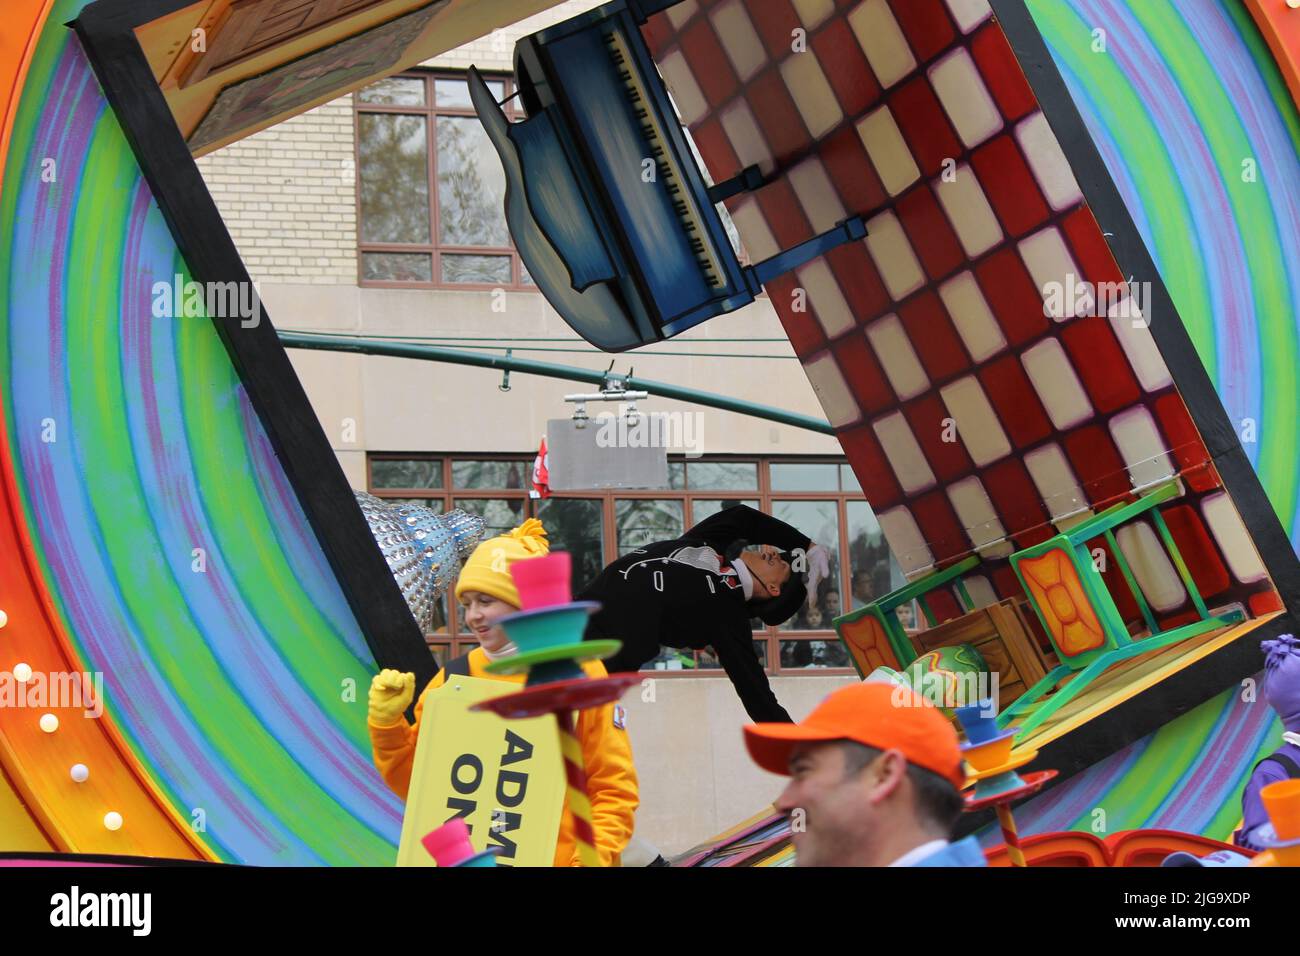 Clowns of the Macy's Thanksgiving Day Parade Stock Photo